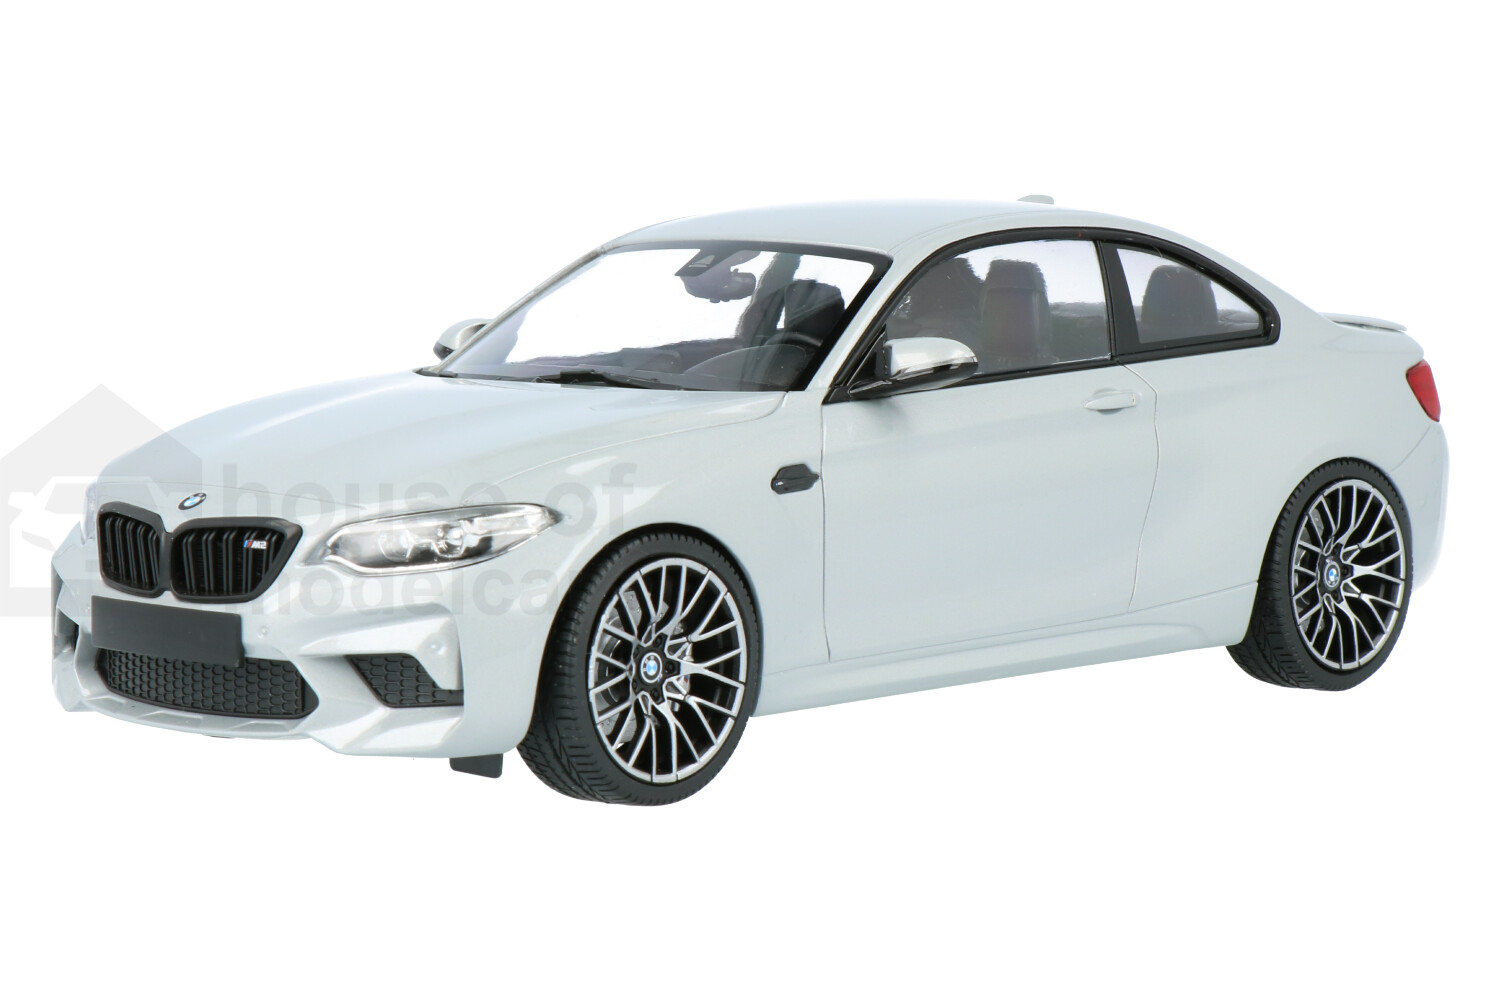 BMW-M2-Competition-155028005_13154012138162563-MinichampsBMW-M2-Competition-155028005_Houseofmodelcars_.jpg